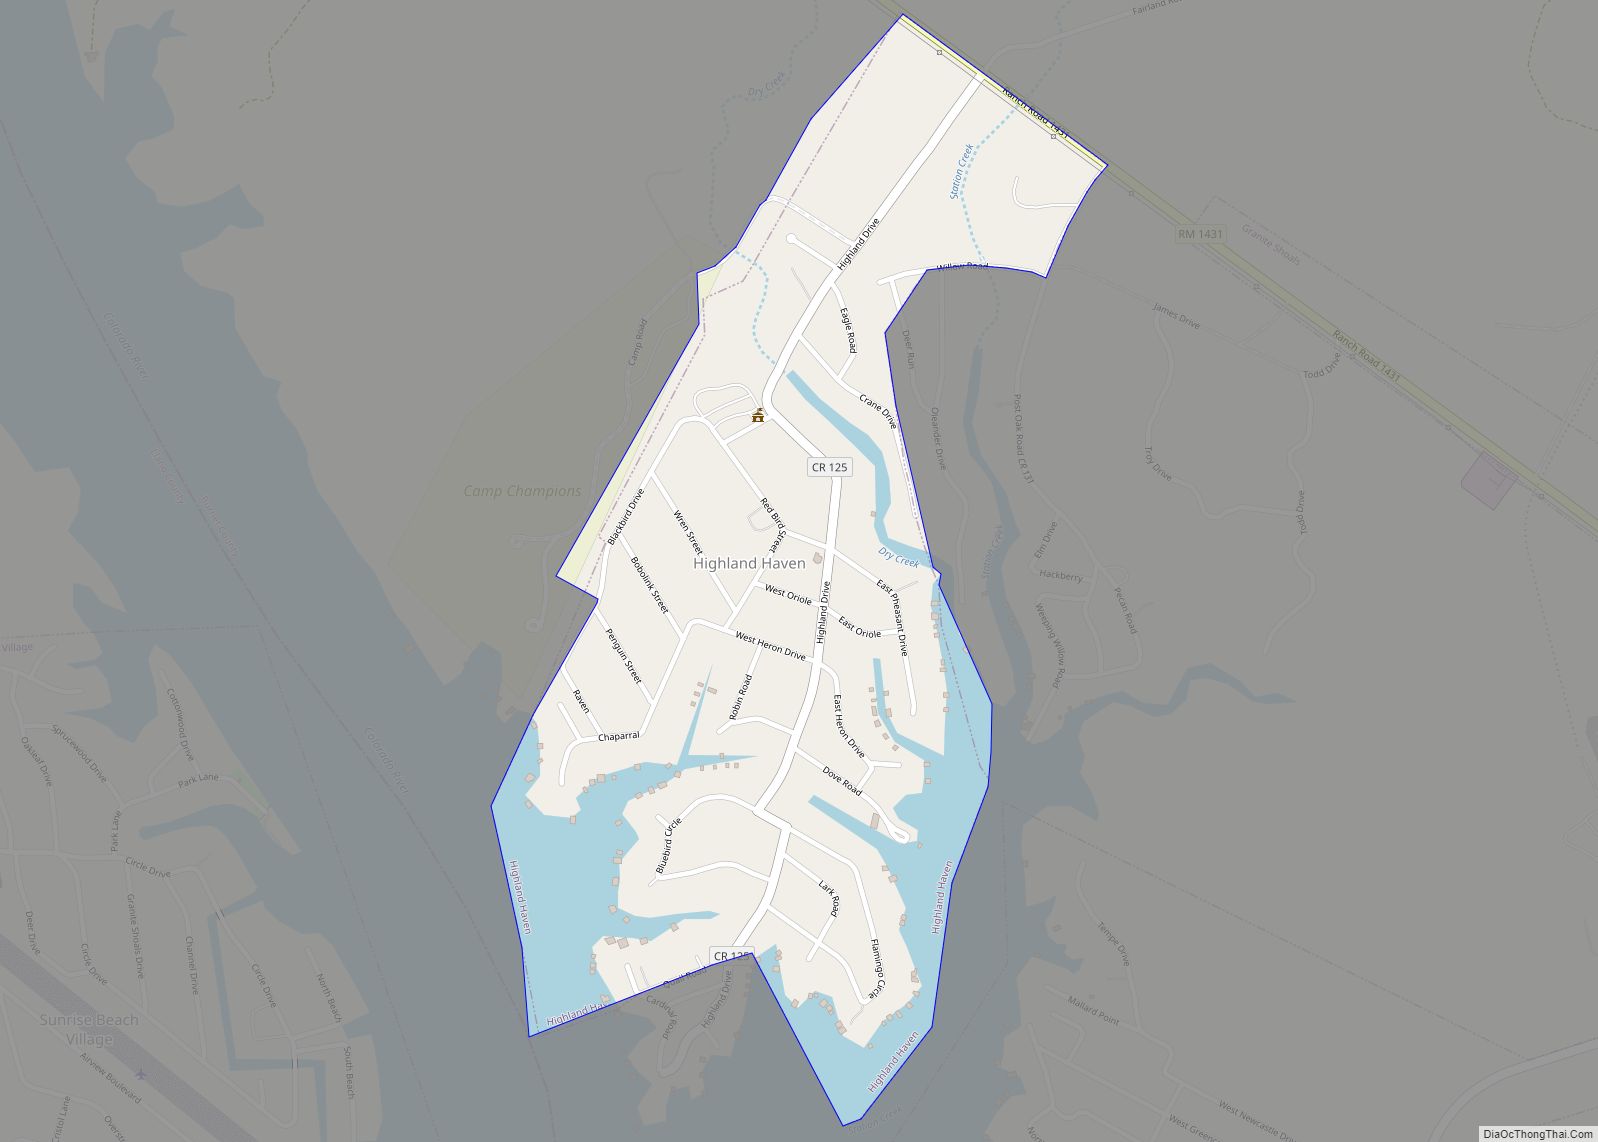 Map of Highland Haven city